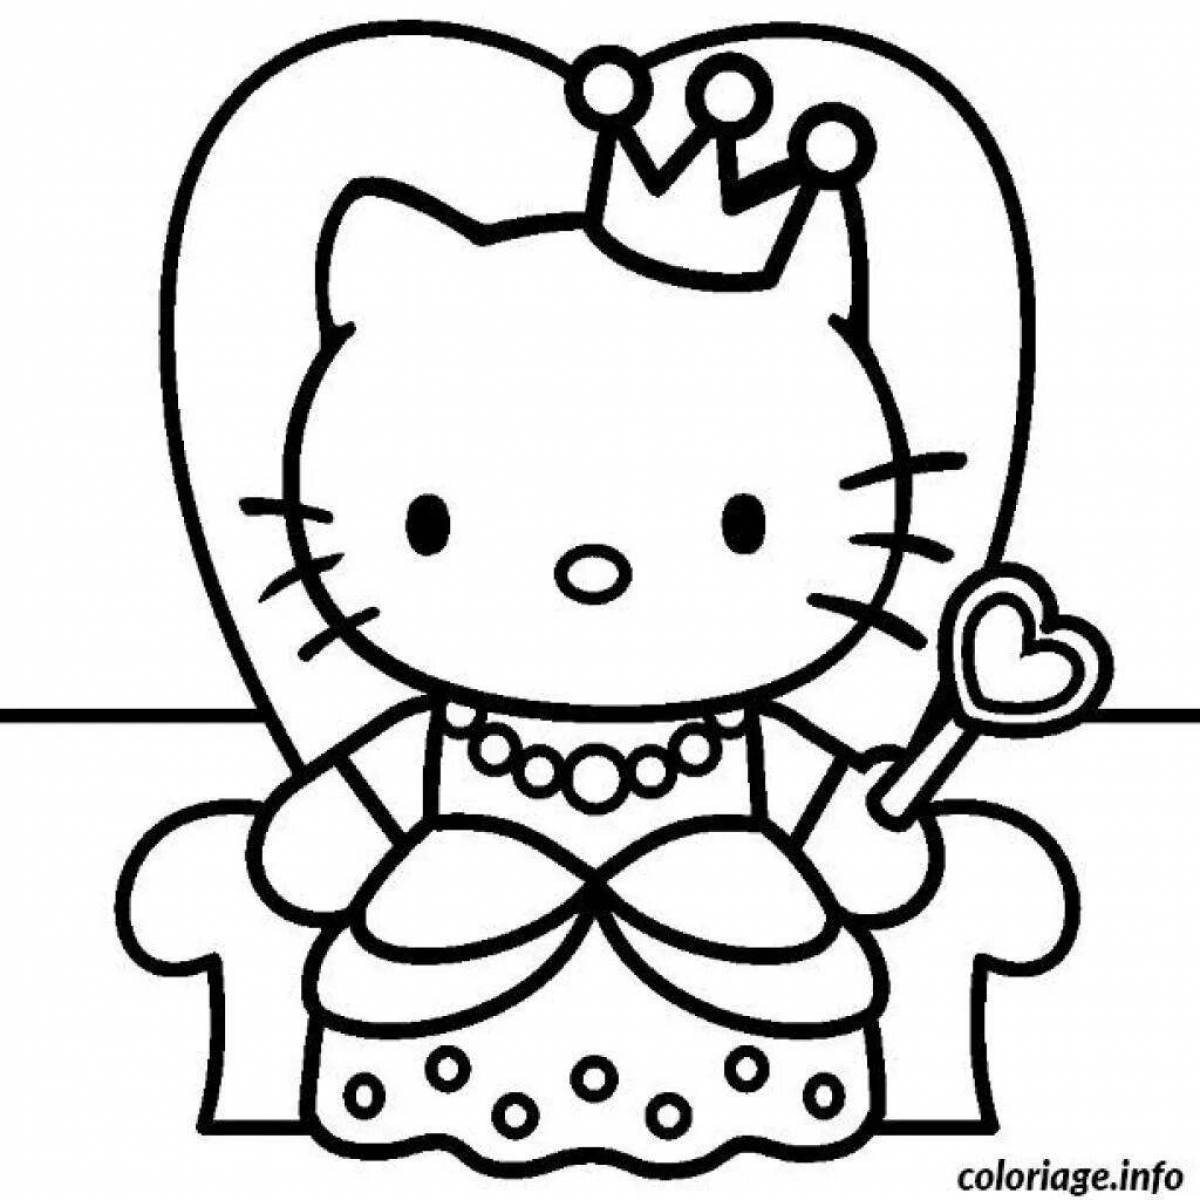 Milady's gorgeous hello kitty coloring book